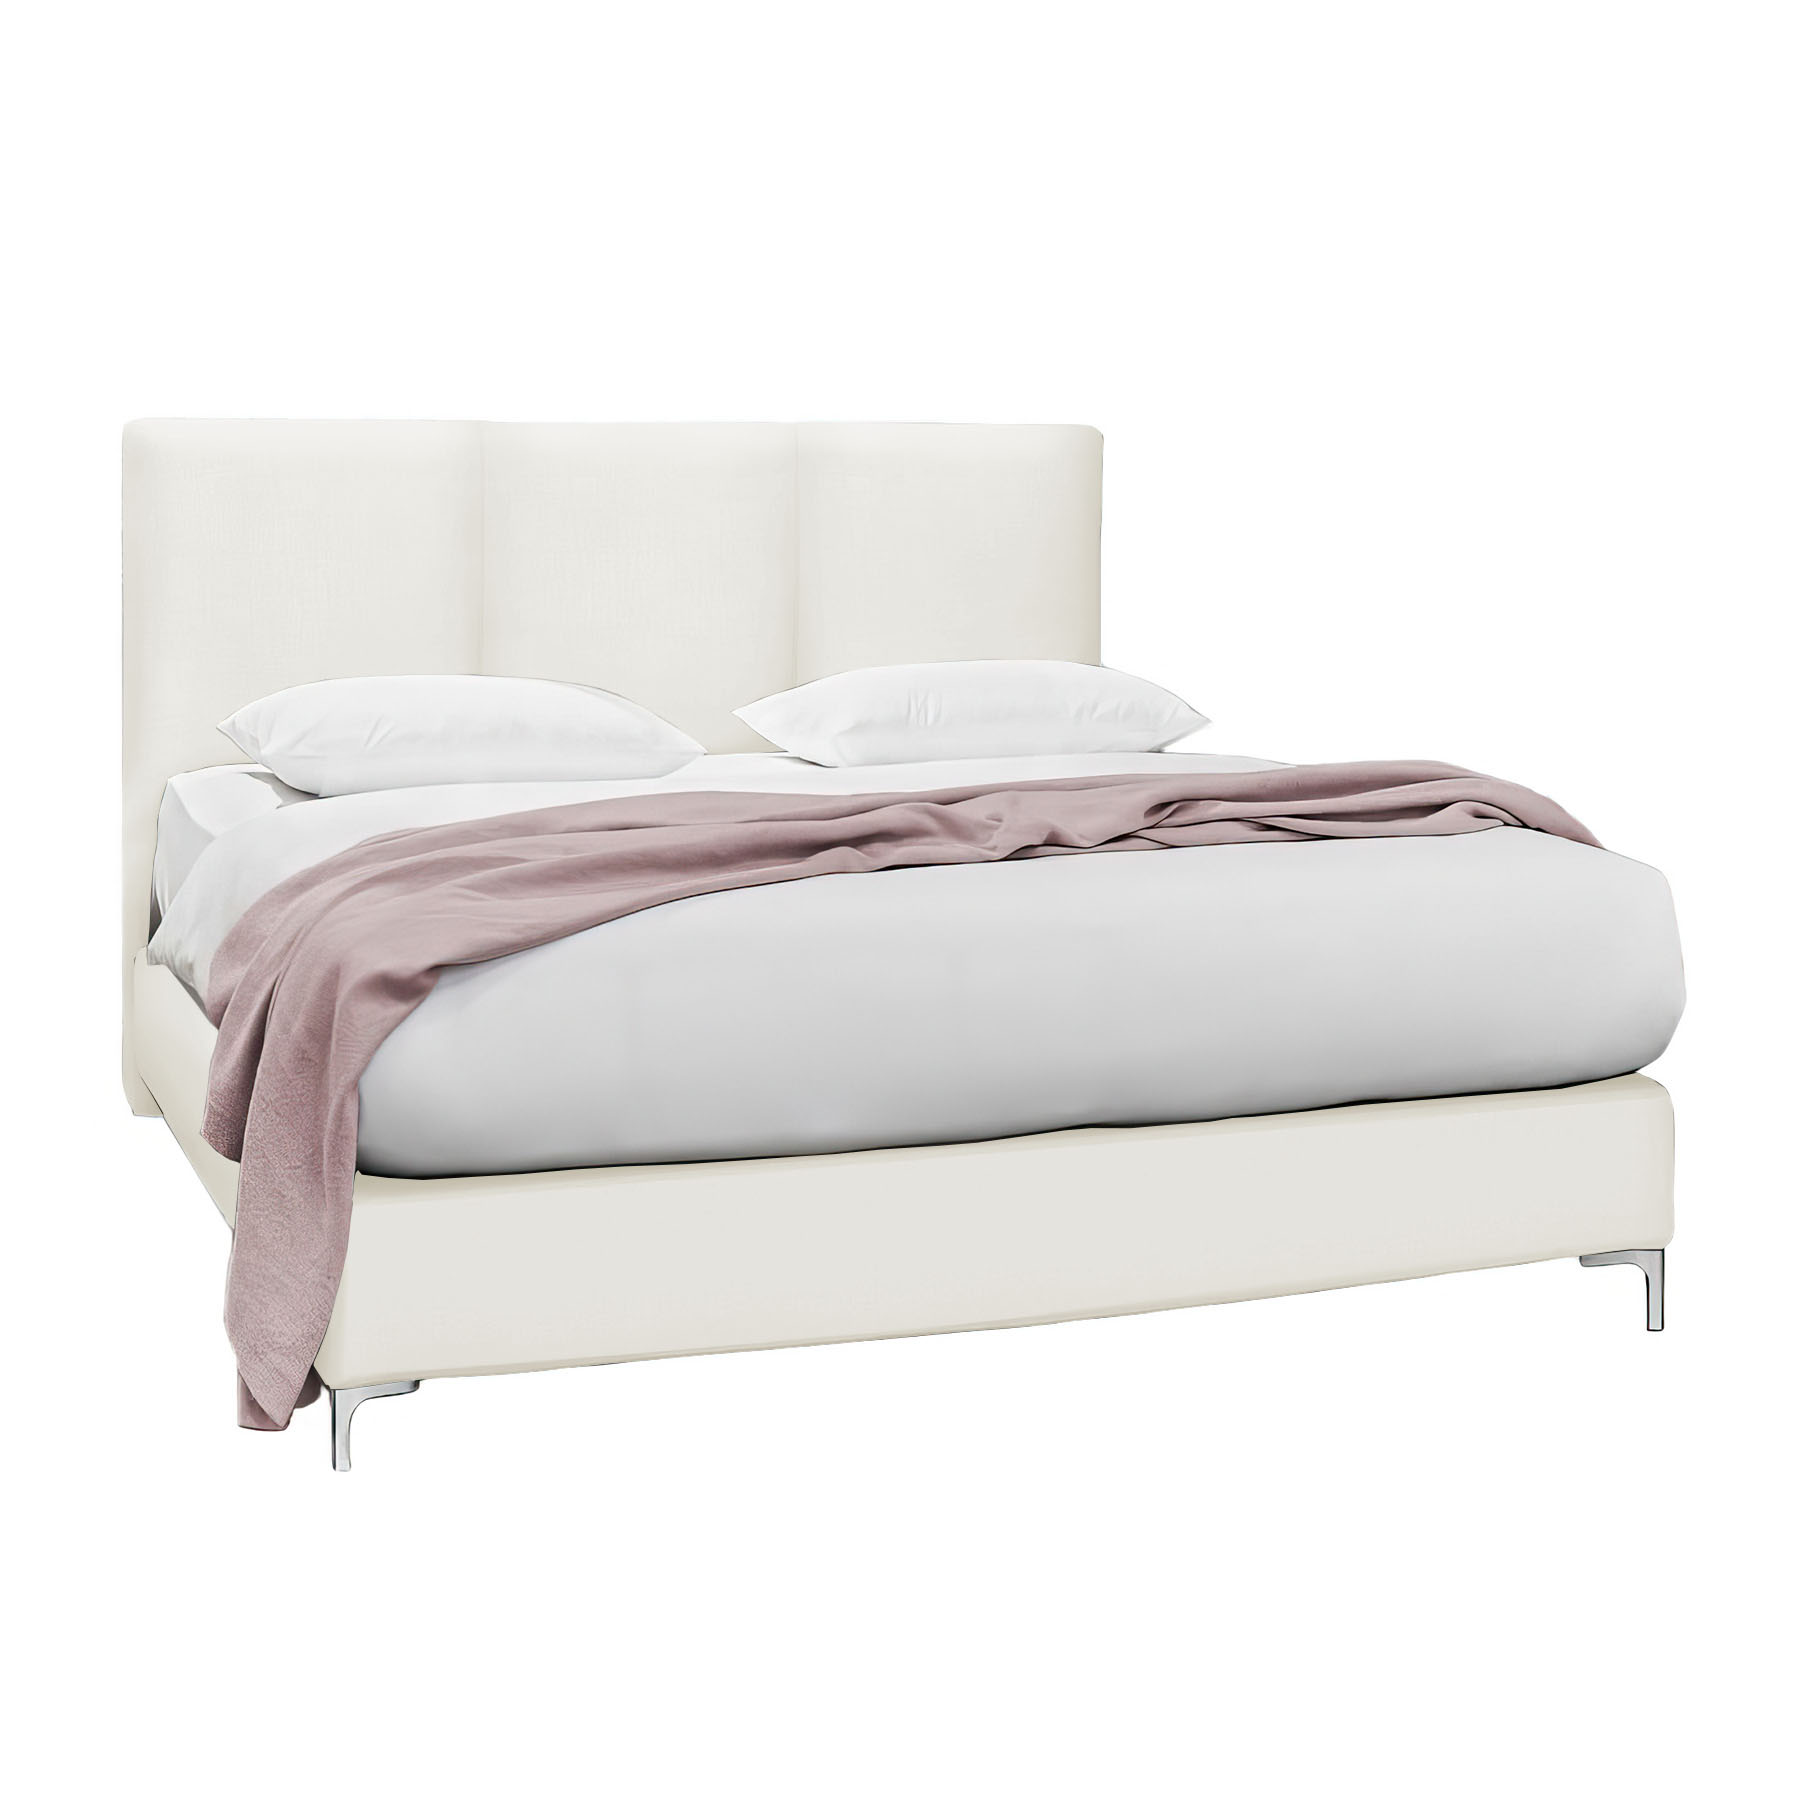 Boxspringbett Kate Select 160/210cm in Hot Madison Wollweiß